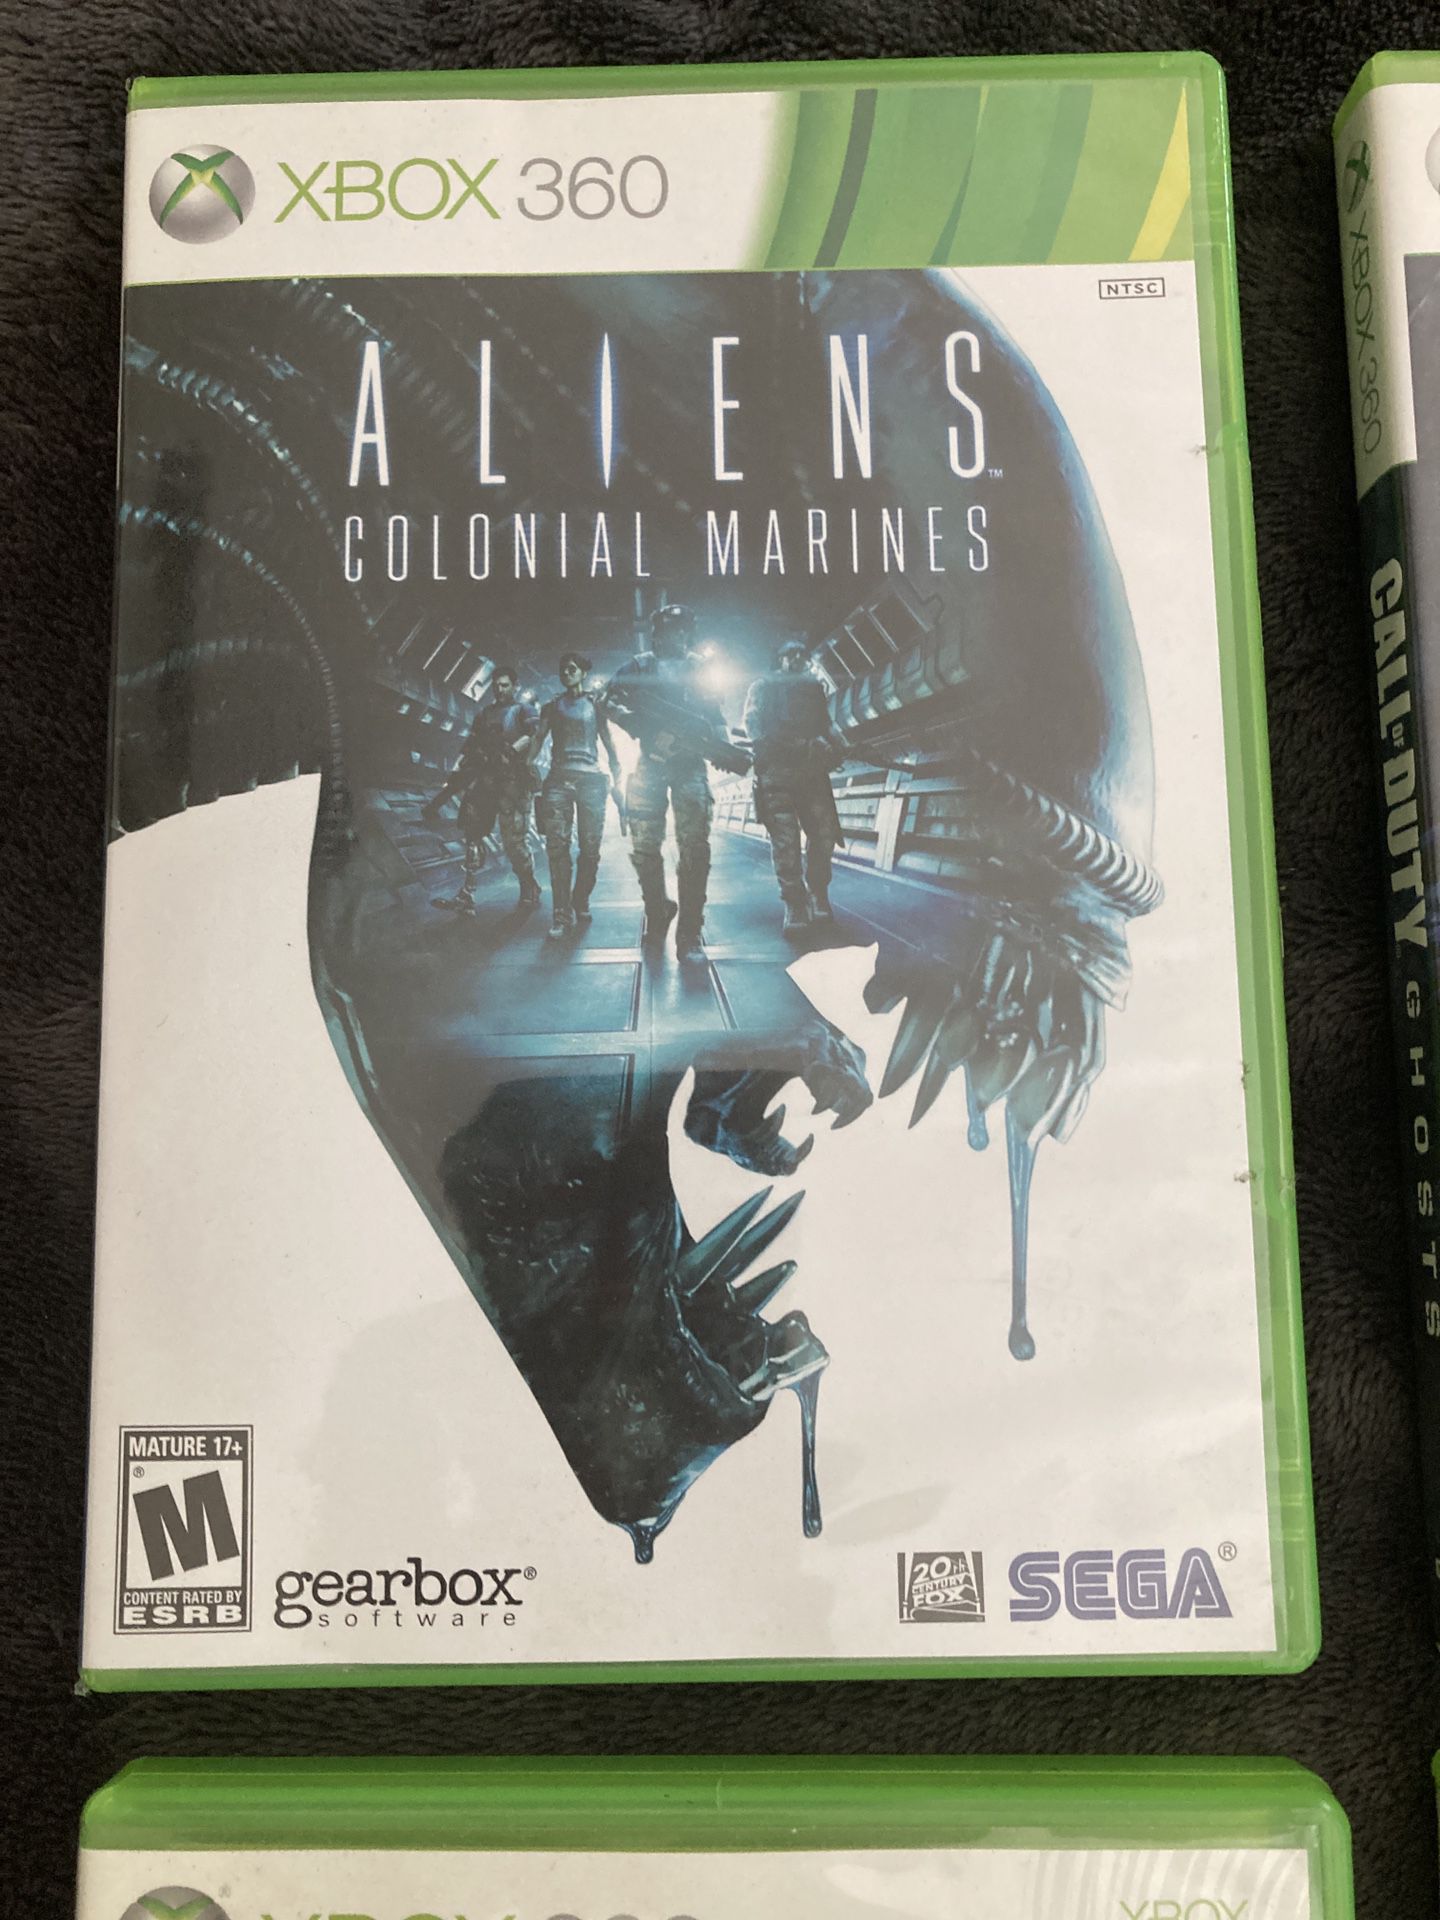 XBox 360 game - aliens colonial marines